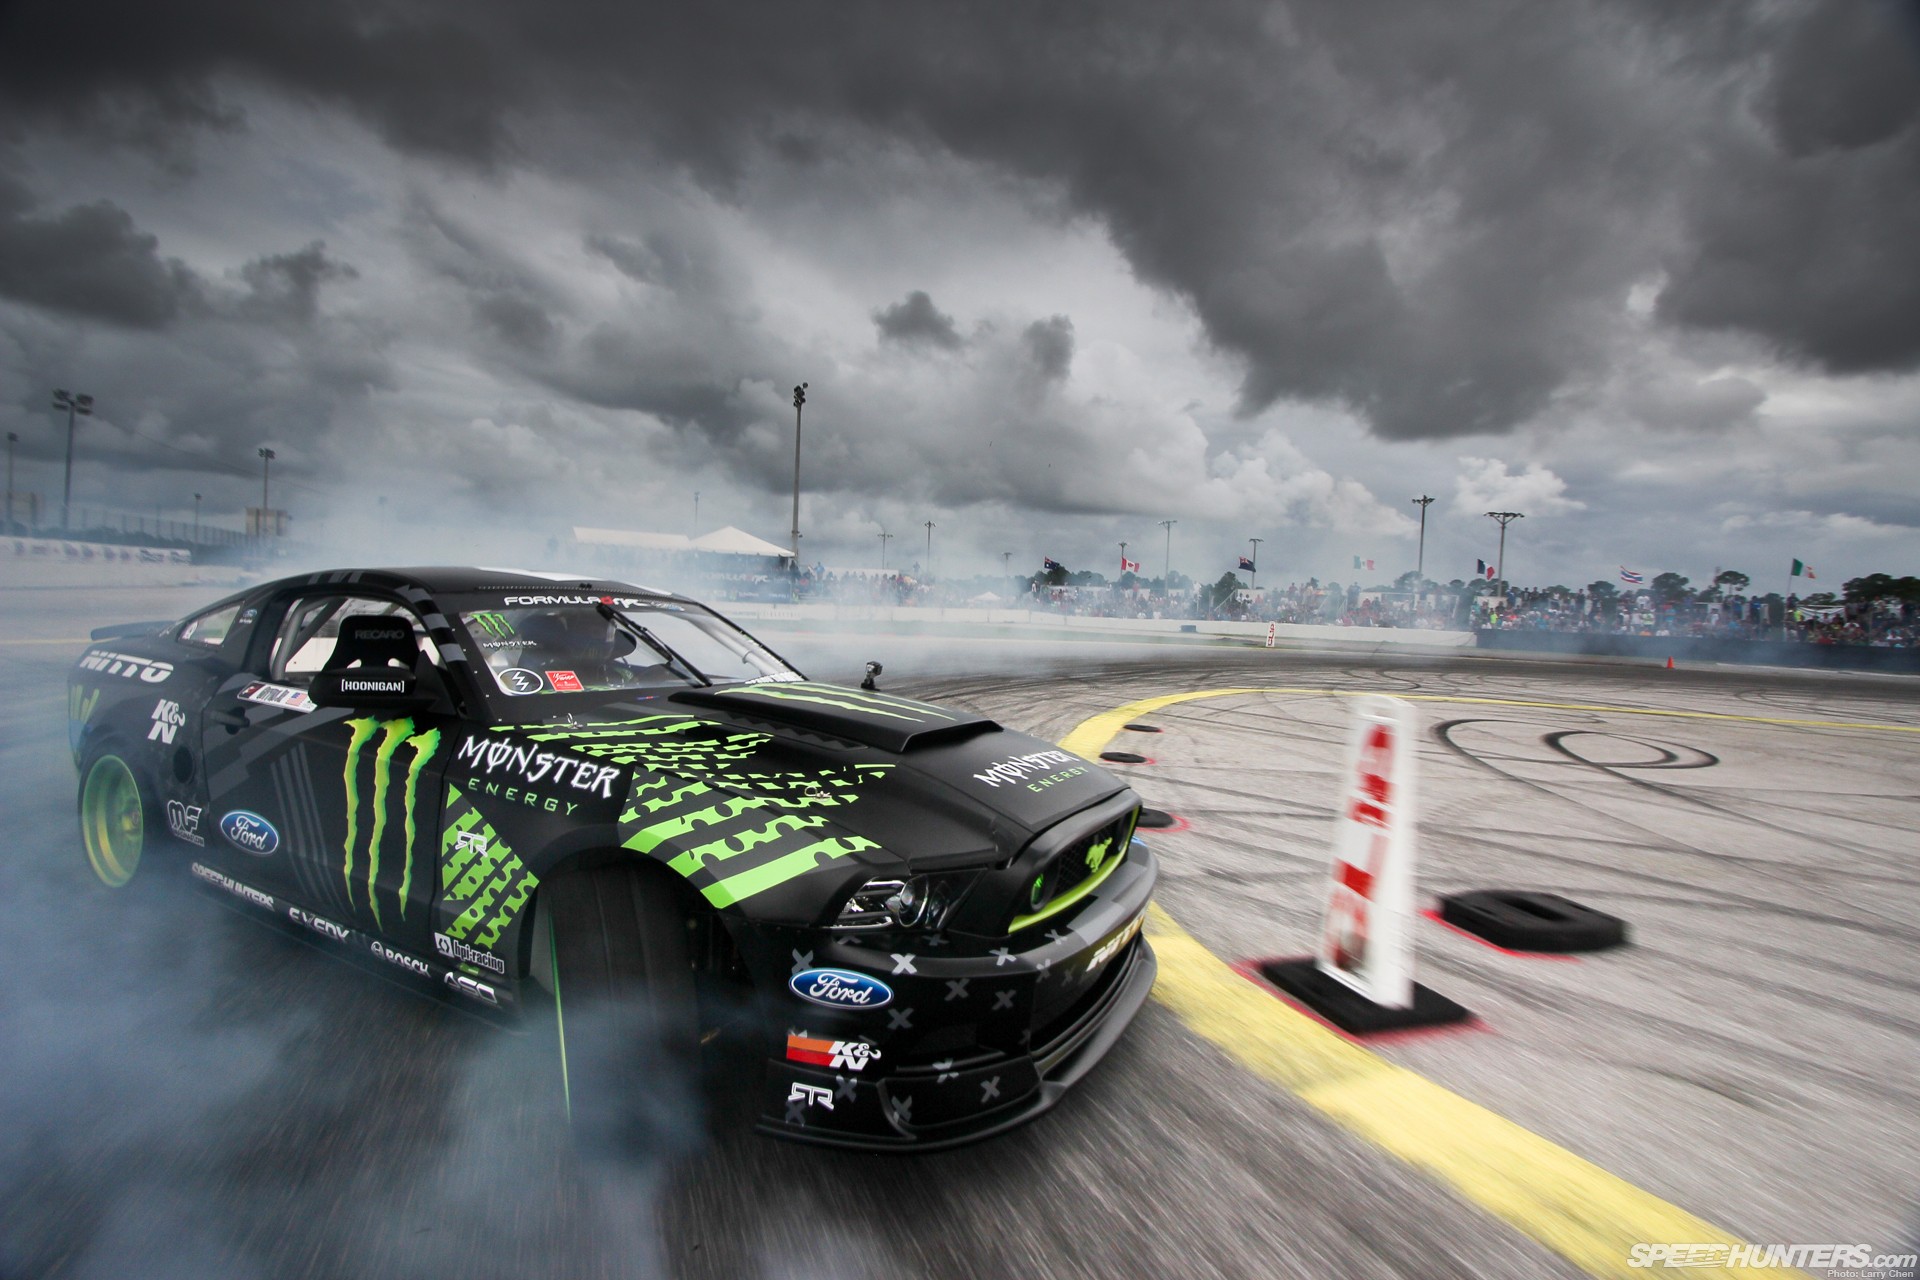 Гонки на машинах дрифт. Monster Energy Ford Mustang RTR. Ford Mustang RTR Monster Energy 2015 дрифт. Форд Мустанг дрифт. Ford Mustang Drift Monster Energy.